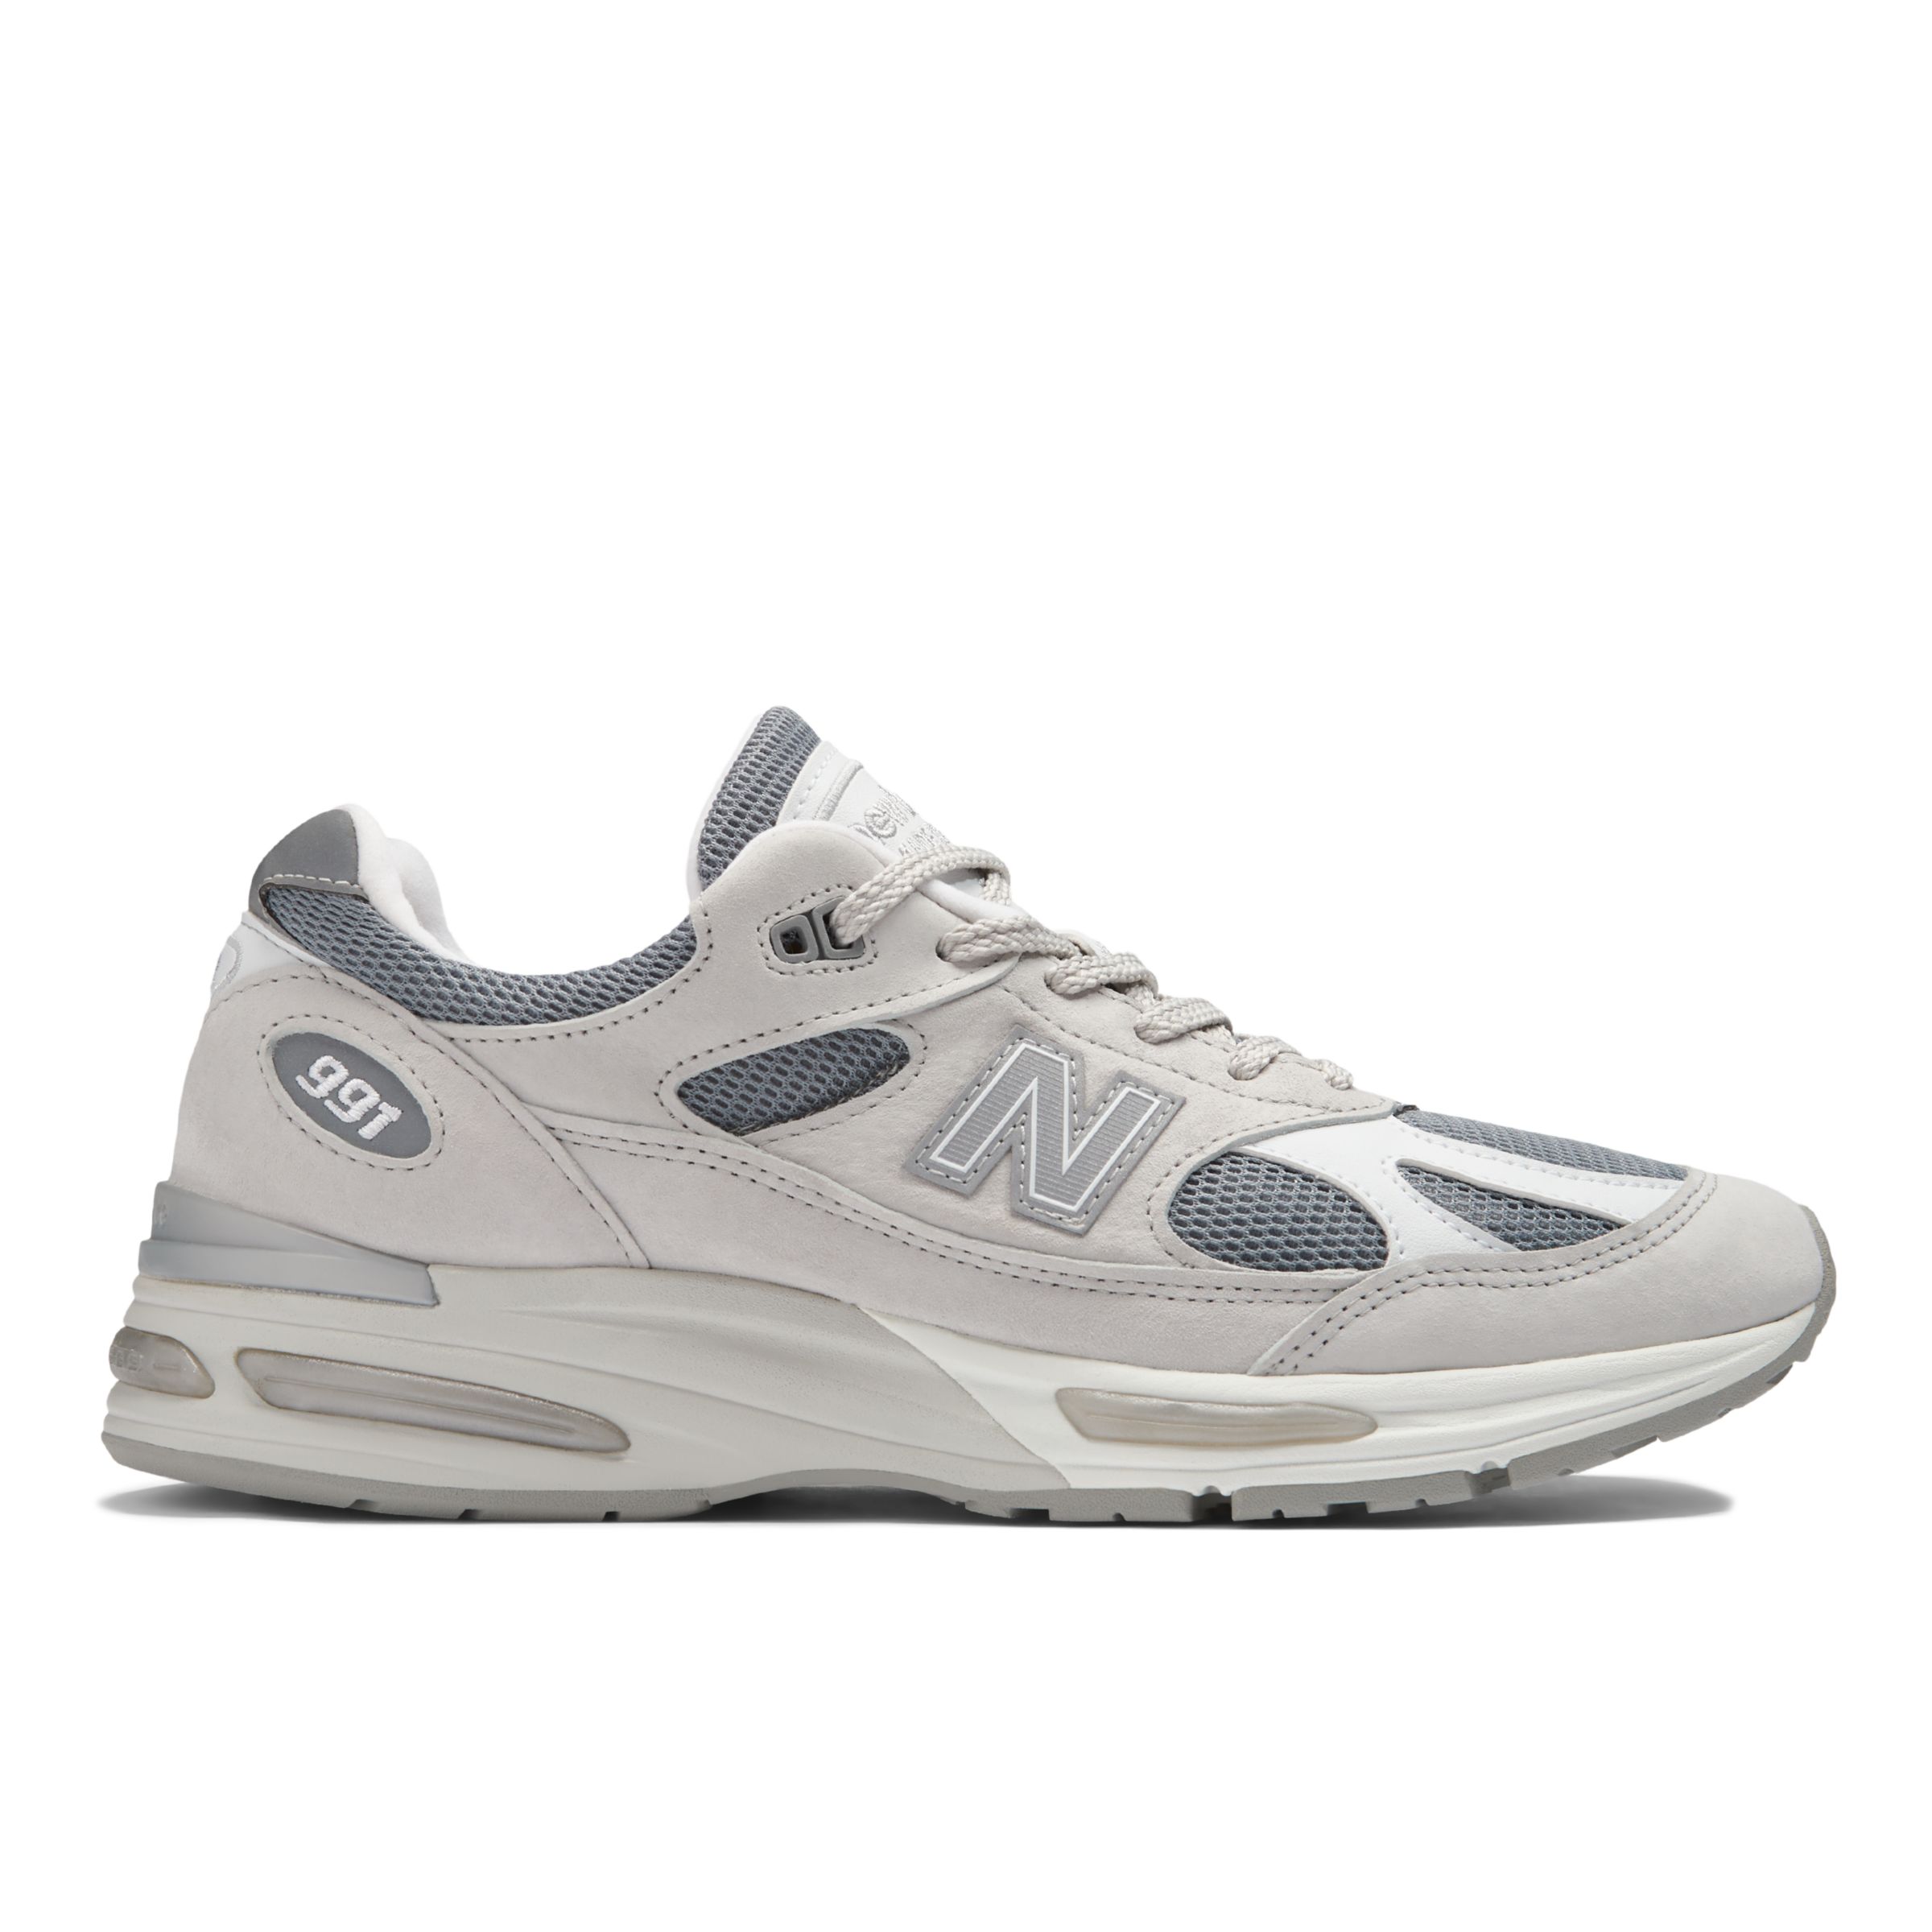 New Balance Unisexe MADE in UK 991v2 en Gris/Blanc, Suede/Mesh, Taille 42.5 Large